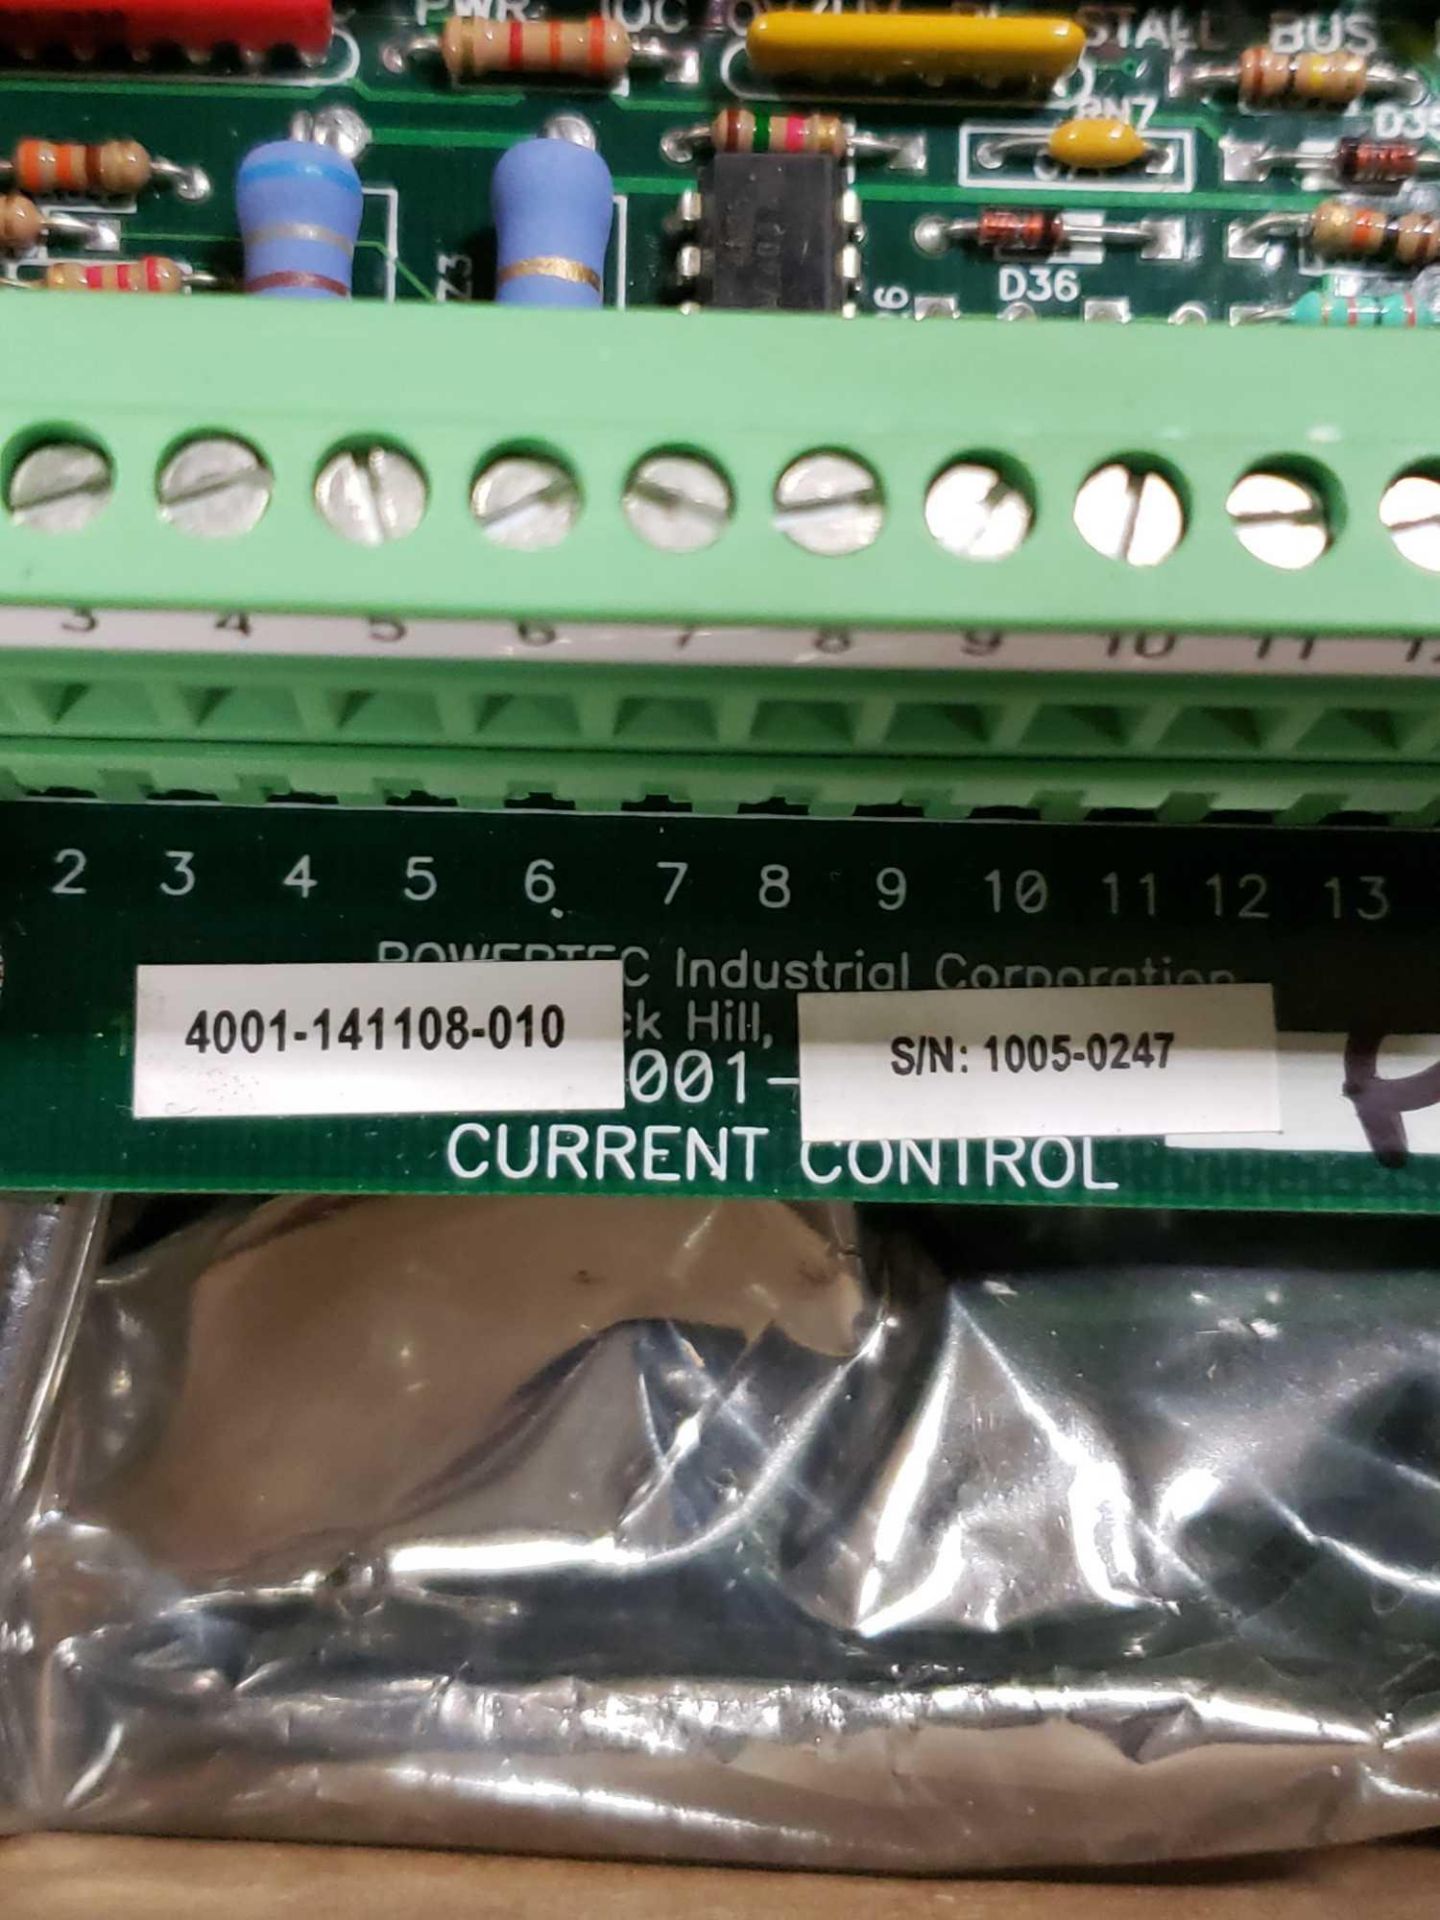 Powertec Industrial Controls model 4001-141108-010 control board. New in plastic. - Image 2 of 2